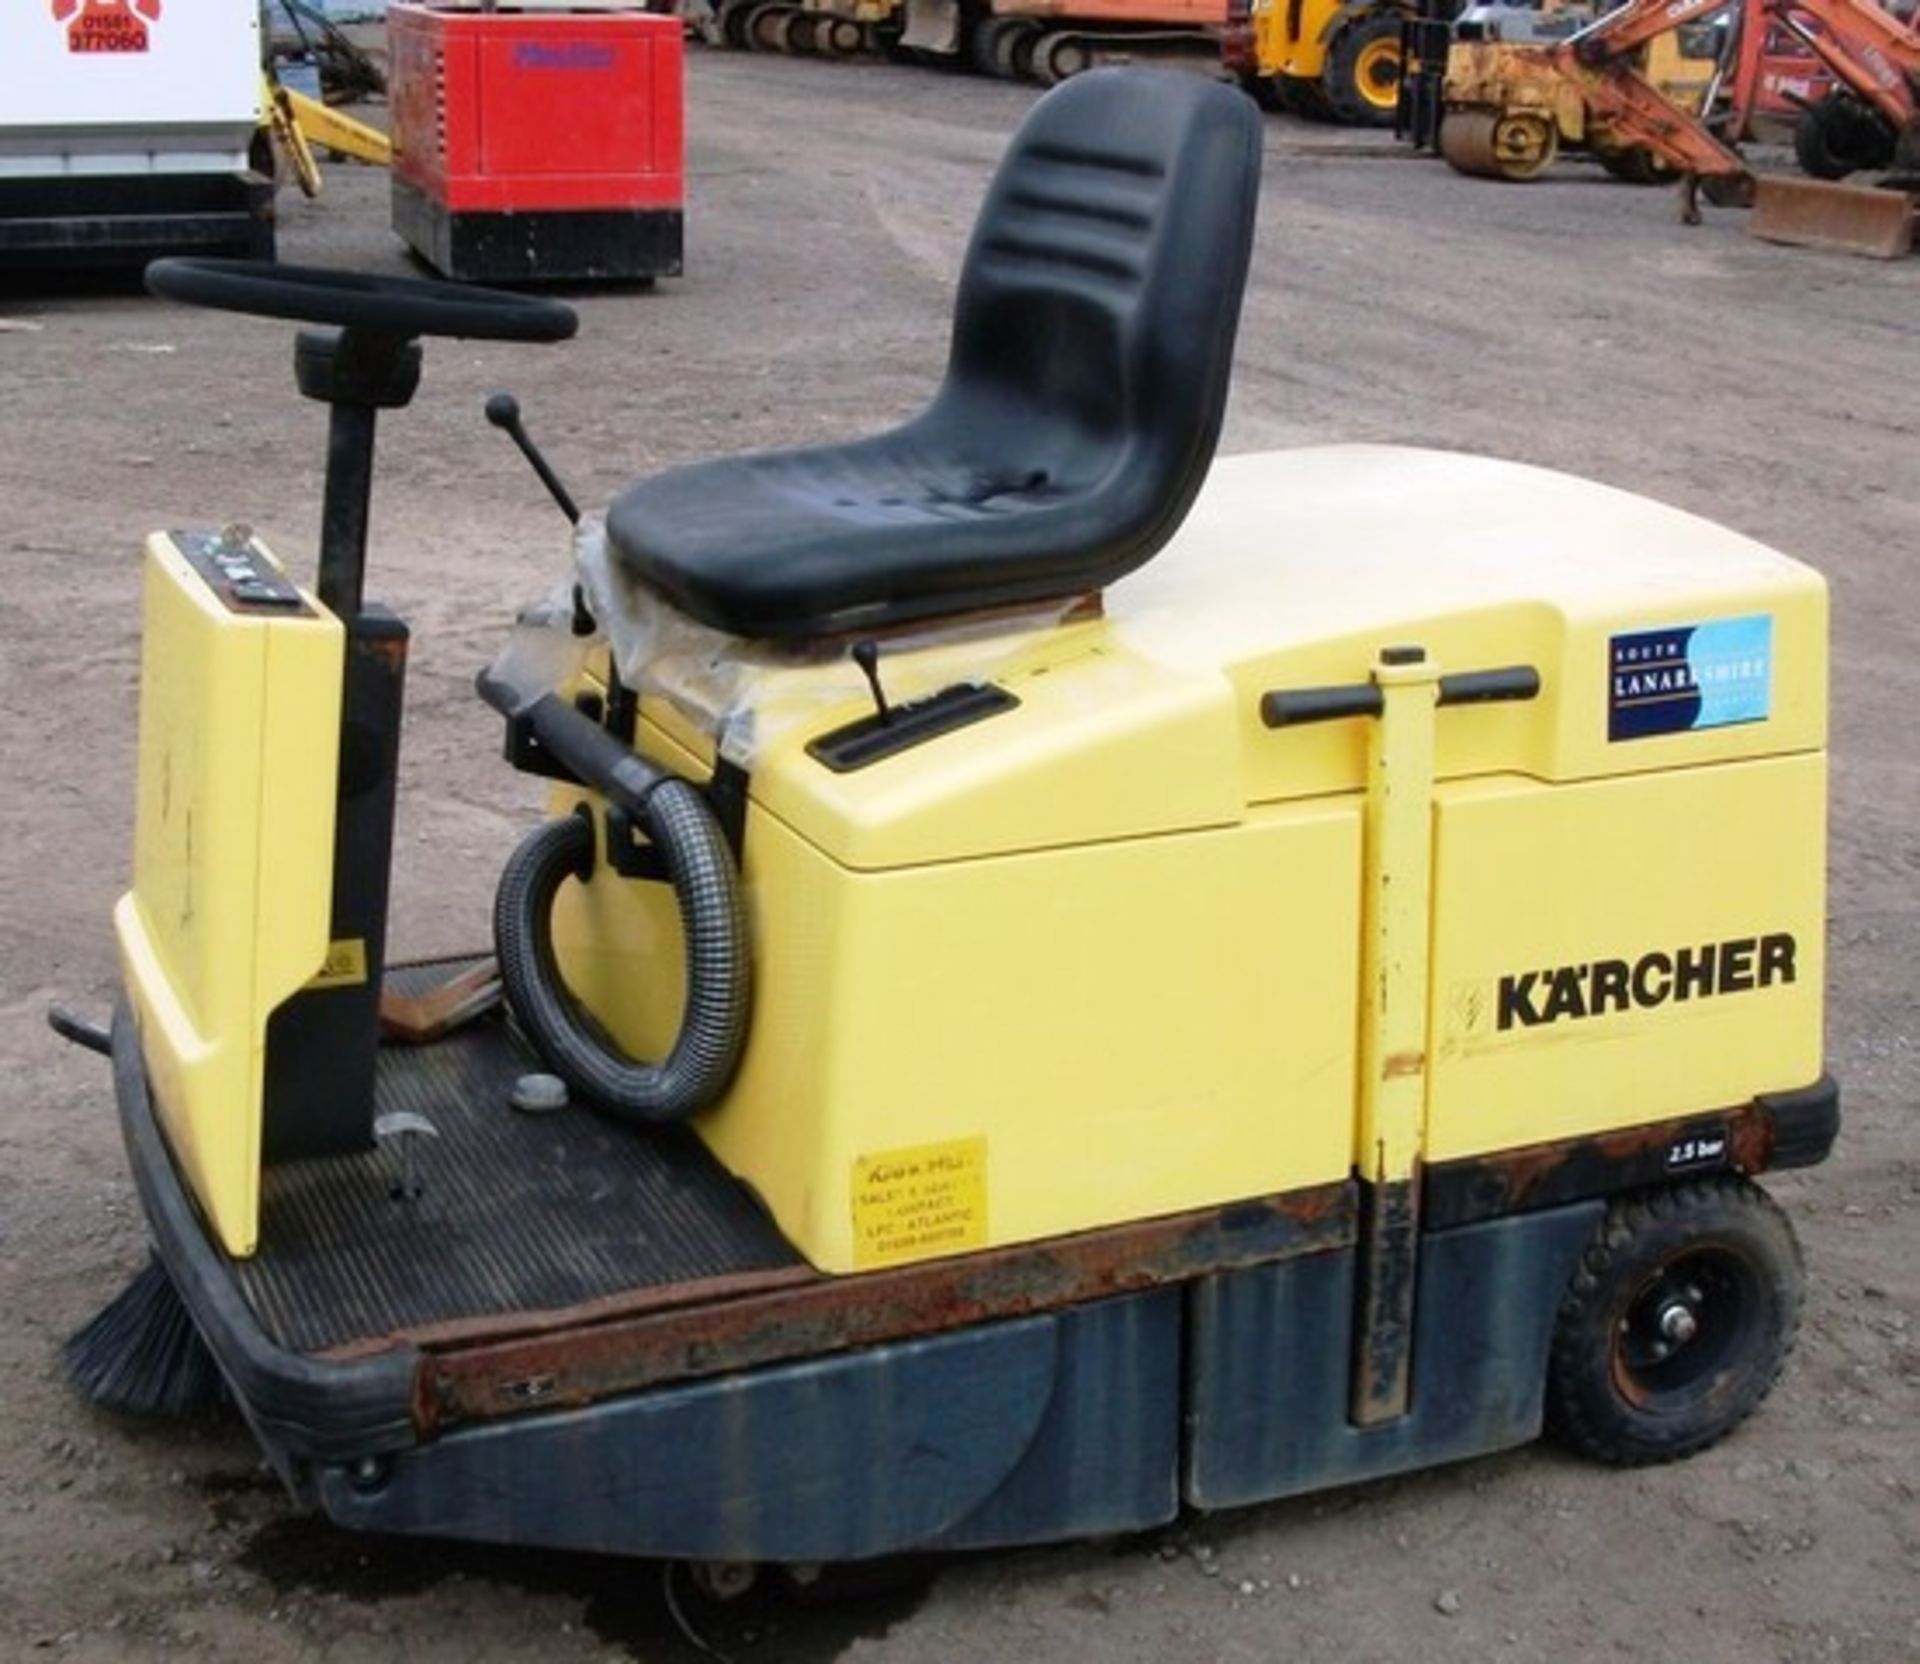 1997 KARCHER MINI RIDE ON SWEEPER, TYPE KMR 1200D, 78 HOURS (NOT VERIFIED)